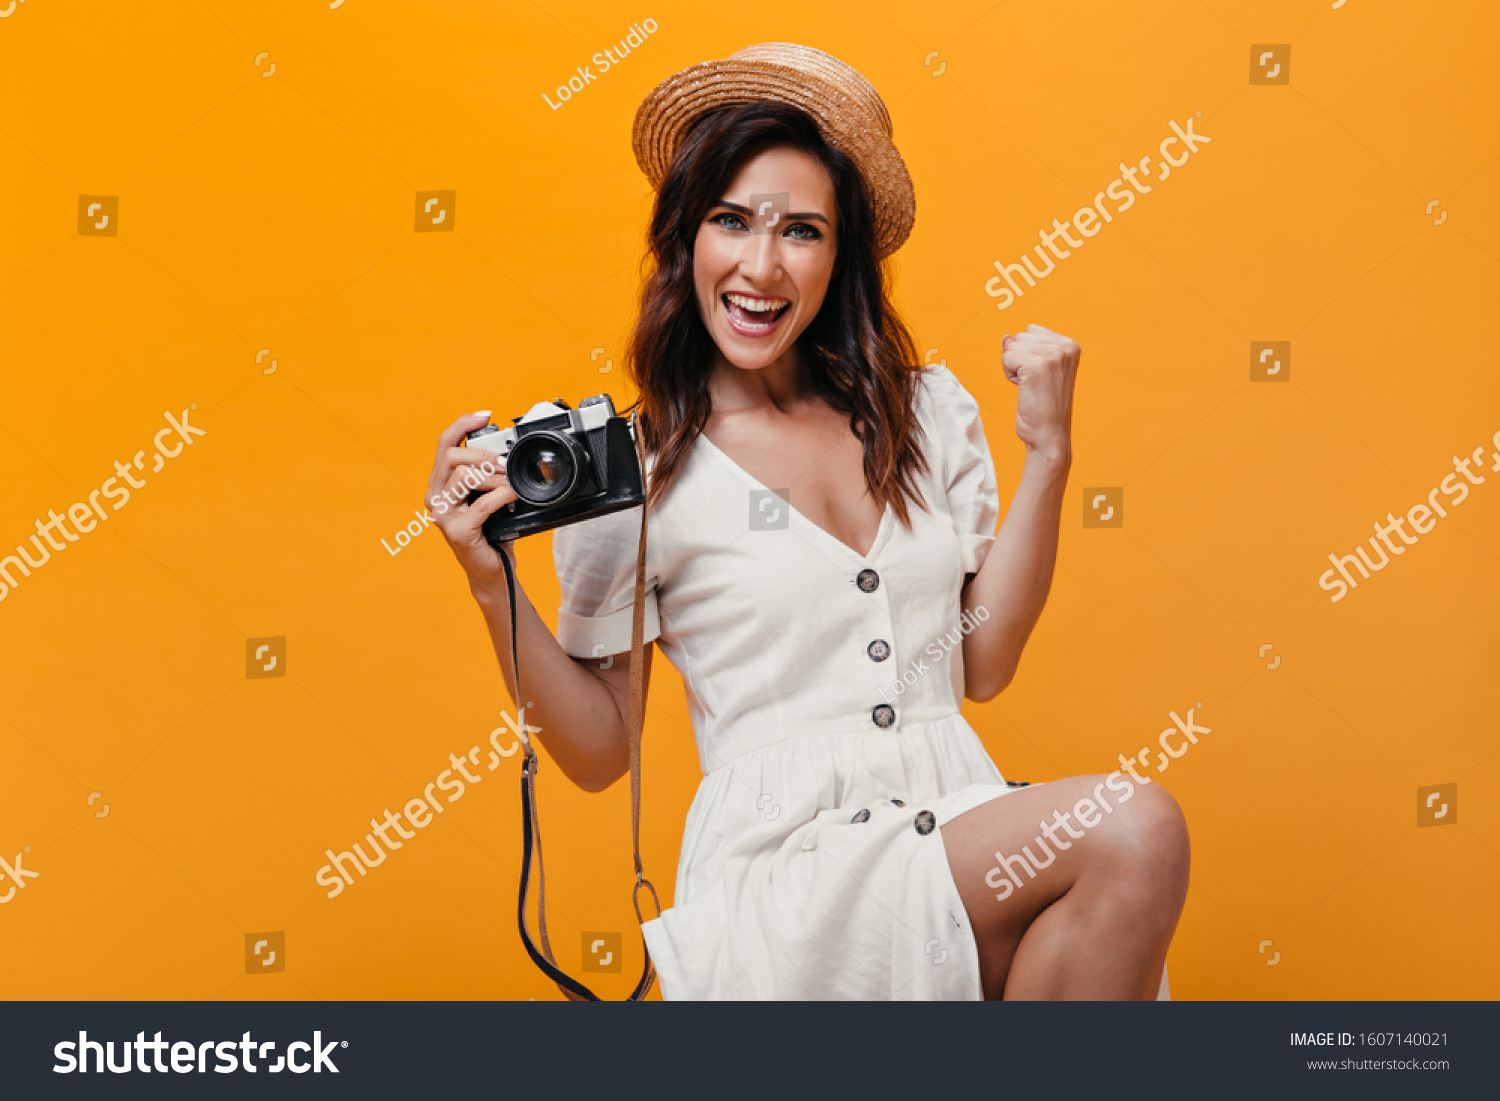 Girl rejoices, holds camera and looks into camera on orange background #1607140021